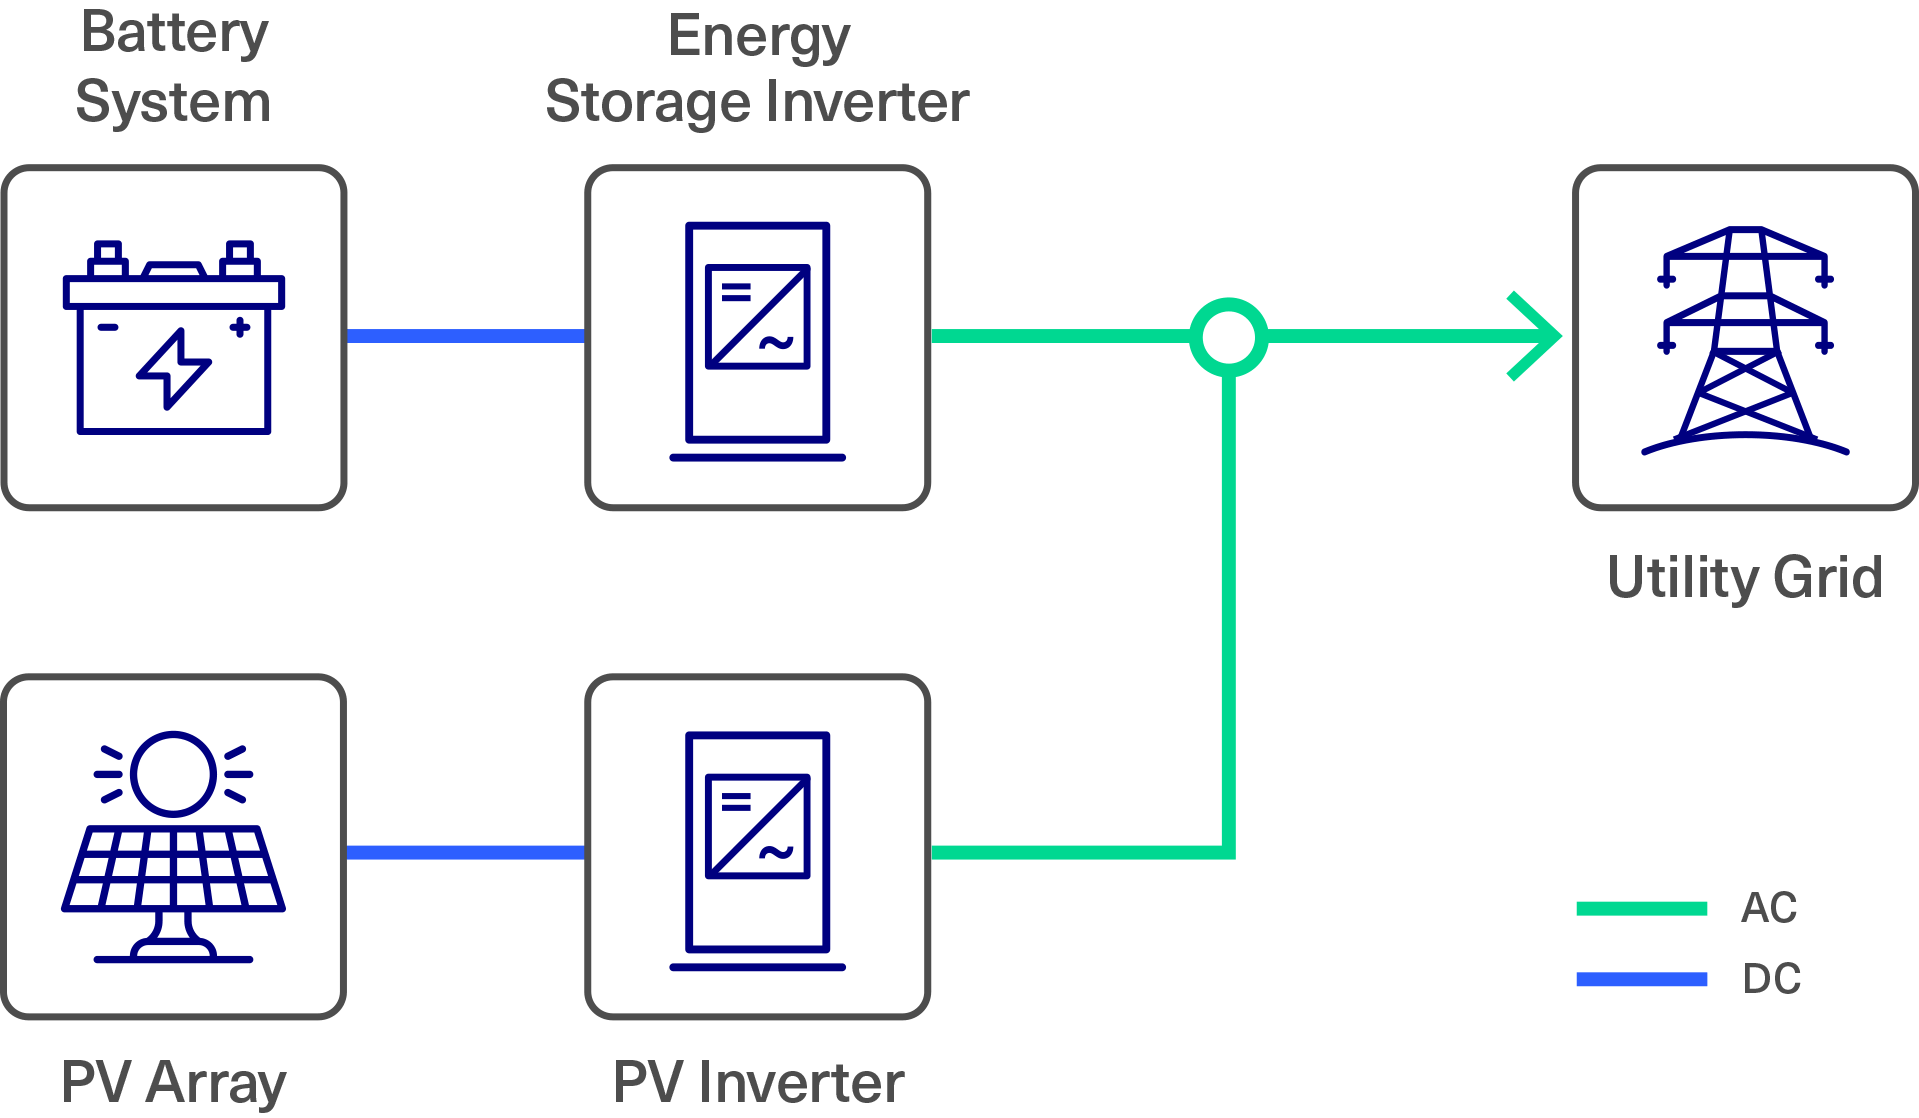 Image showing a simple single-line diagram of an AC-coupled solar plus storage configuration